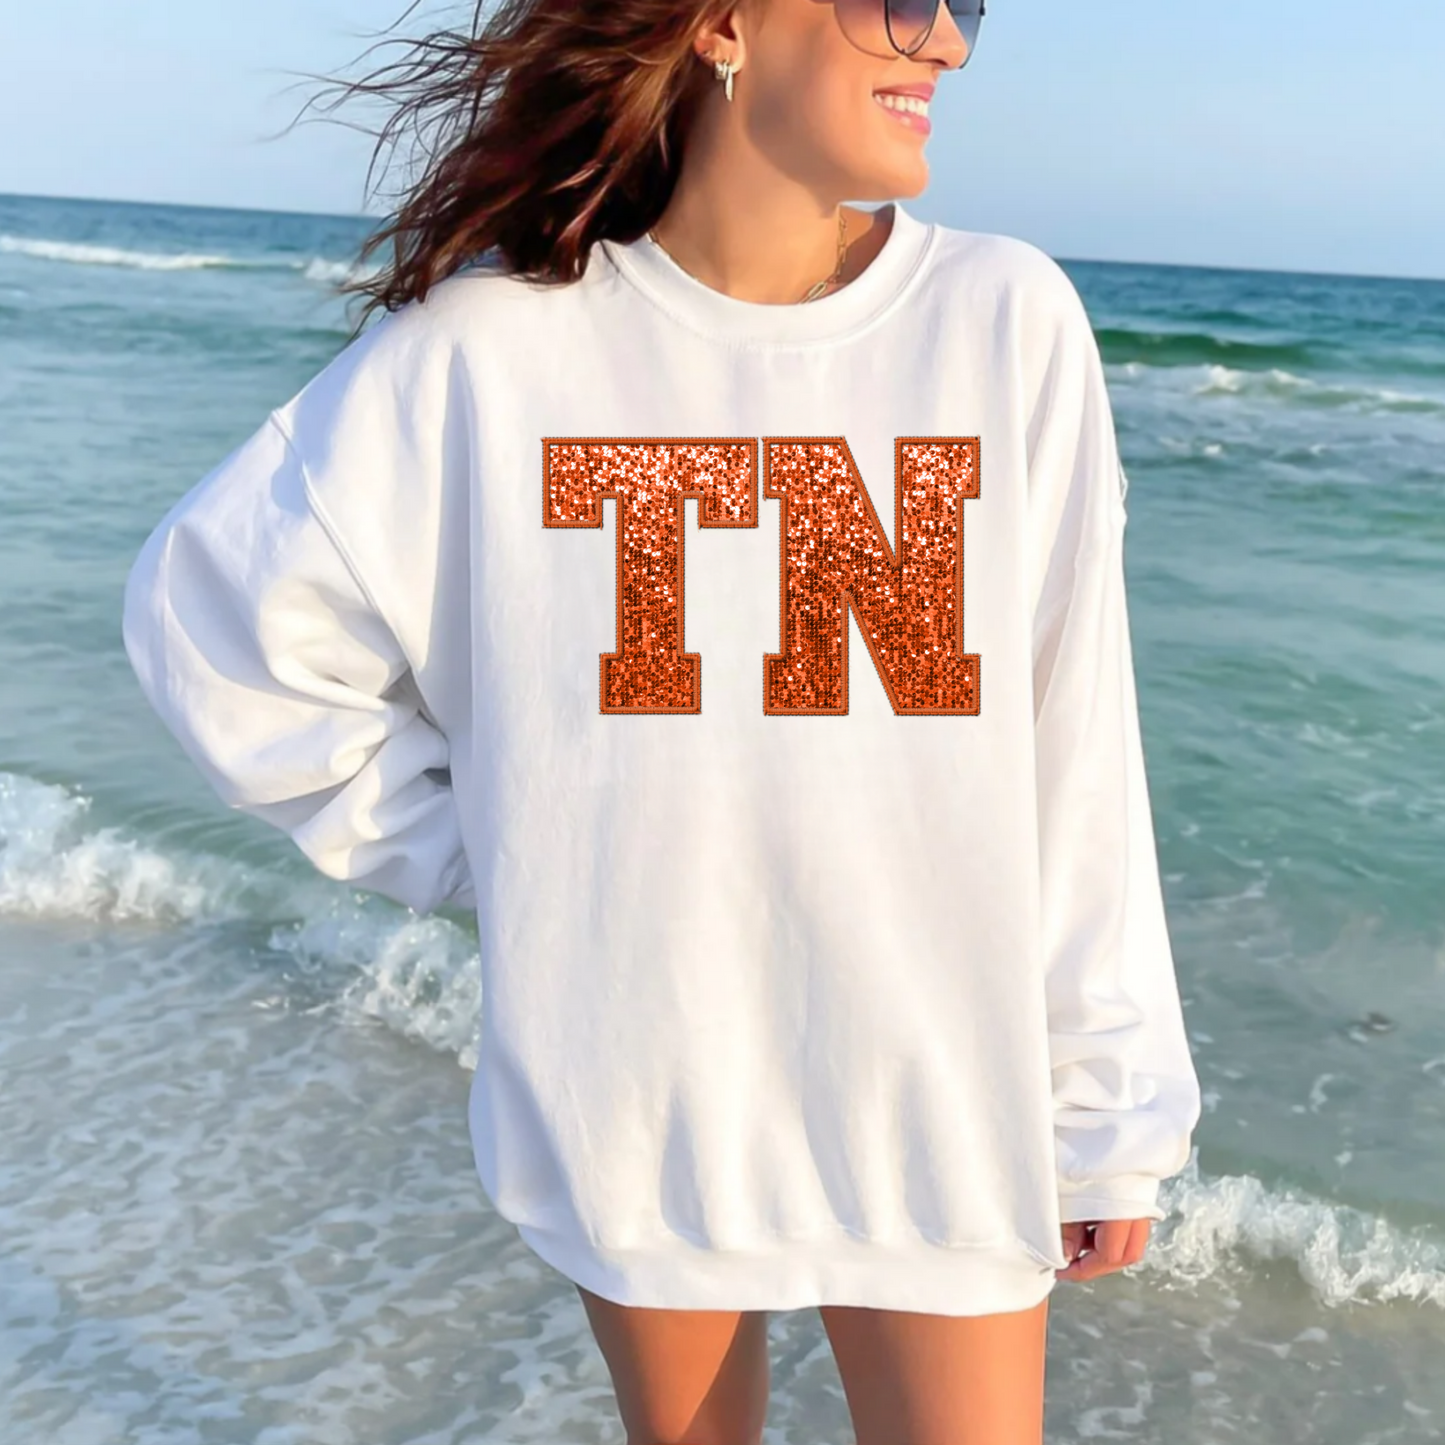 (Shirt not Included) Faux Sequin TN Tennessee - Clear Film Transfer